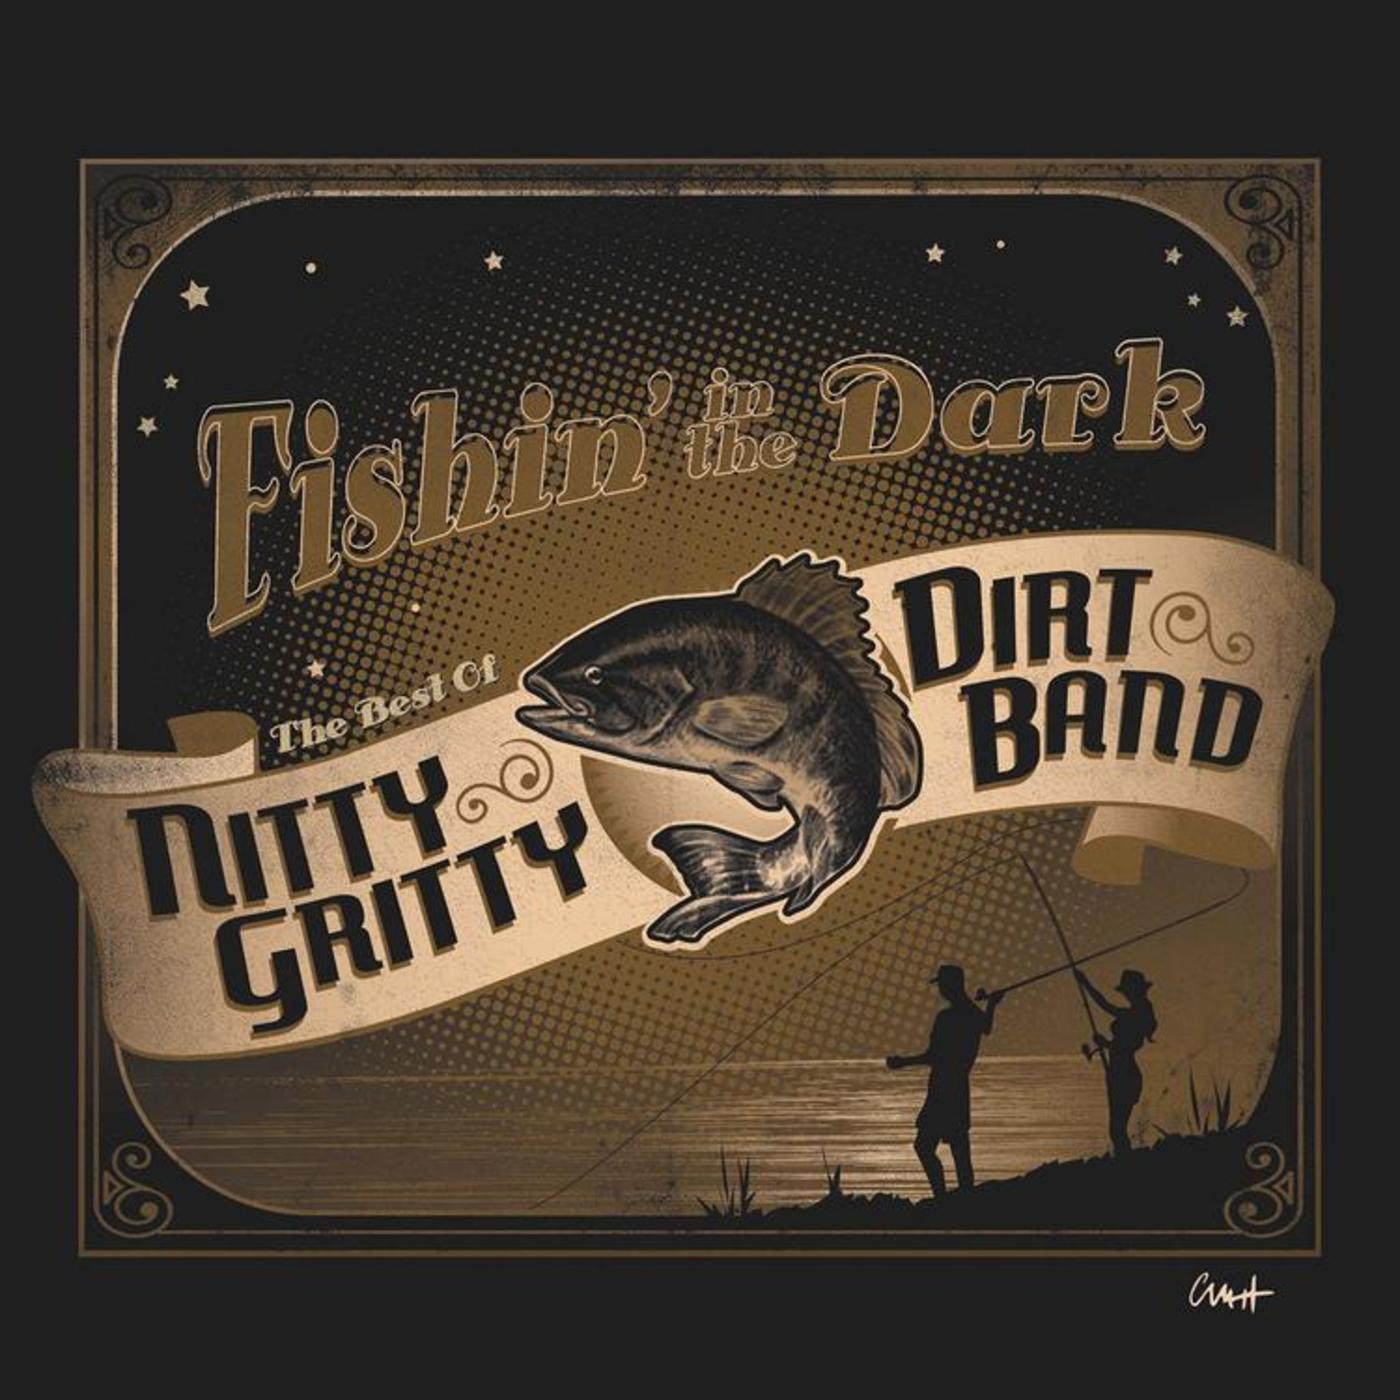 Fishin' In The Dark: The Best Of The Nitty Gritty Dirt Band